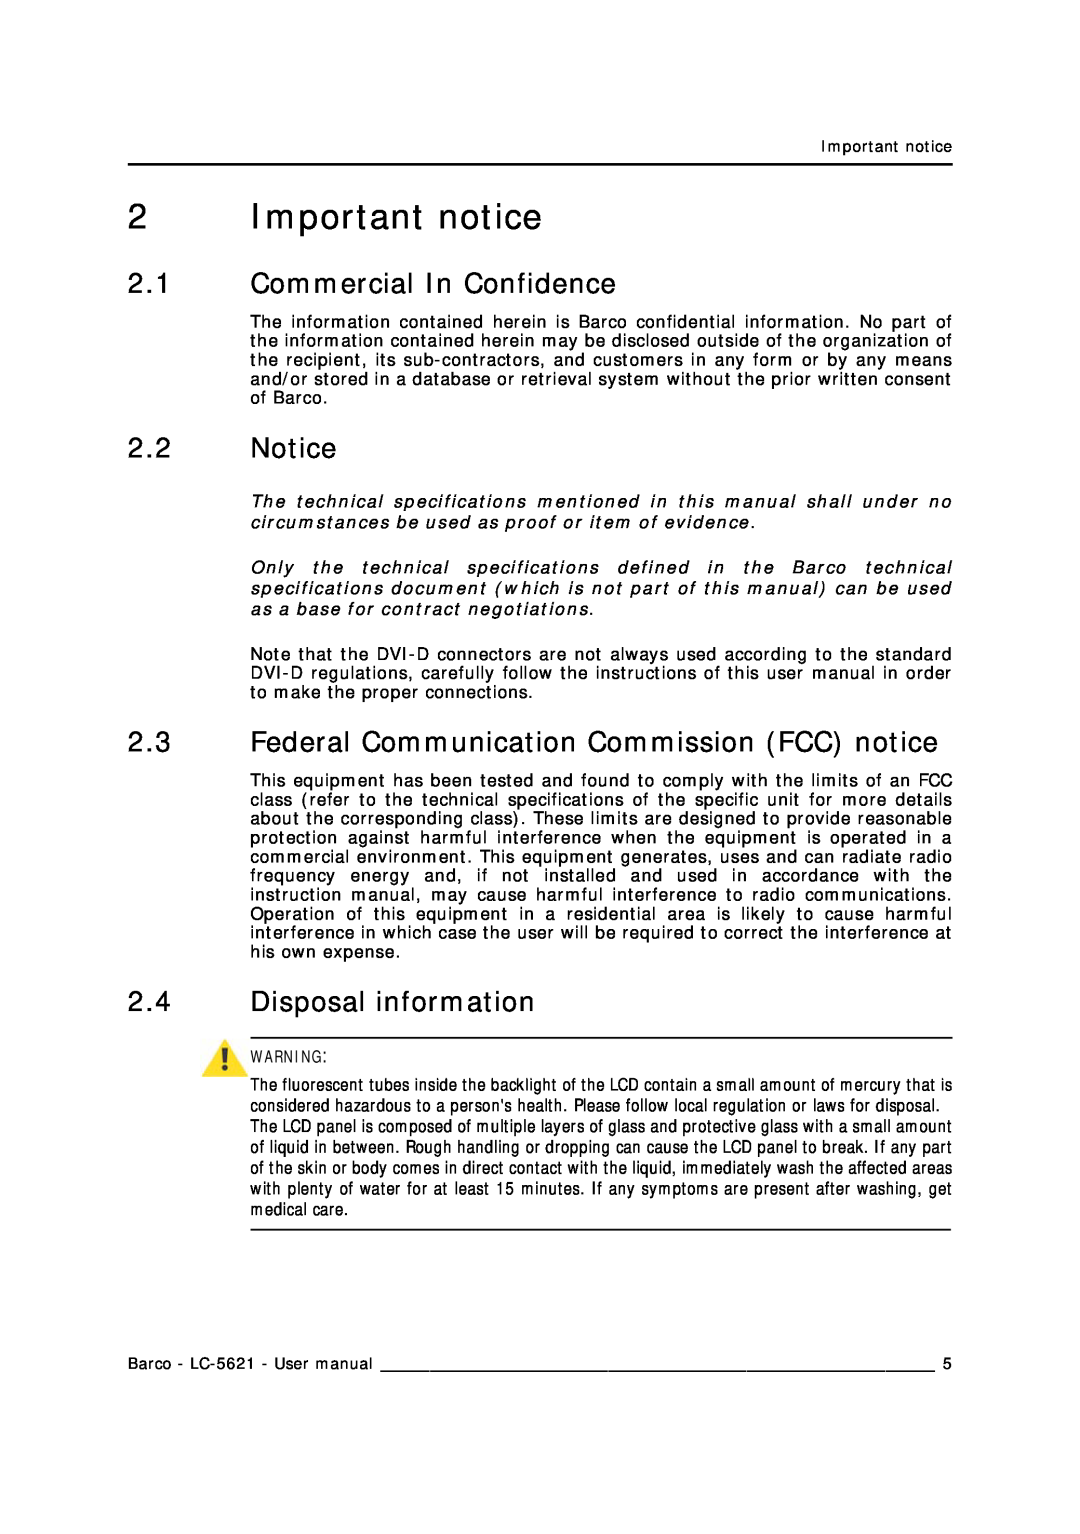 Barco LC-5621 user manual Important notice, Commercial In Confidence, Federal Communication Commission FCC notice 